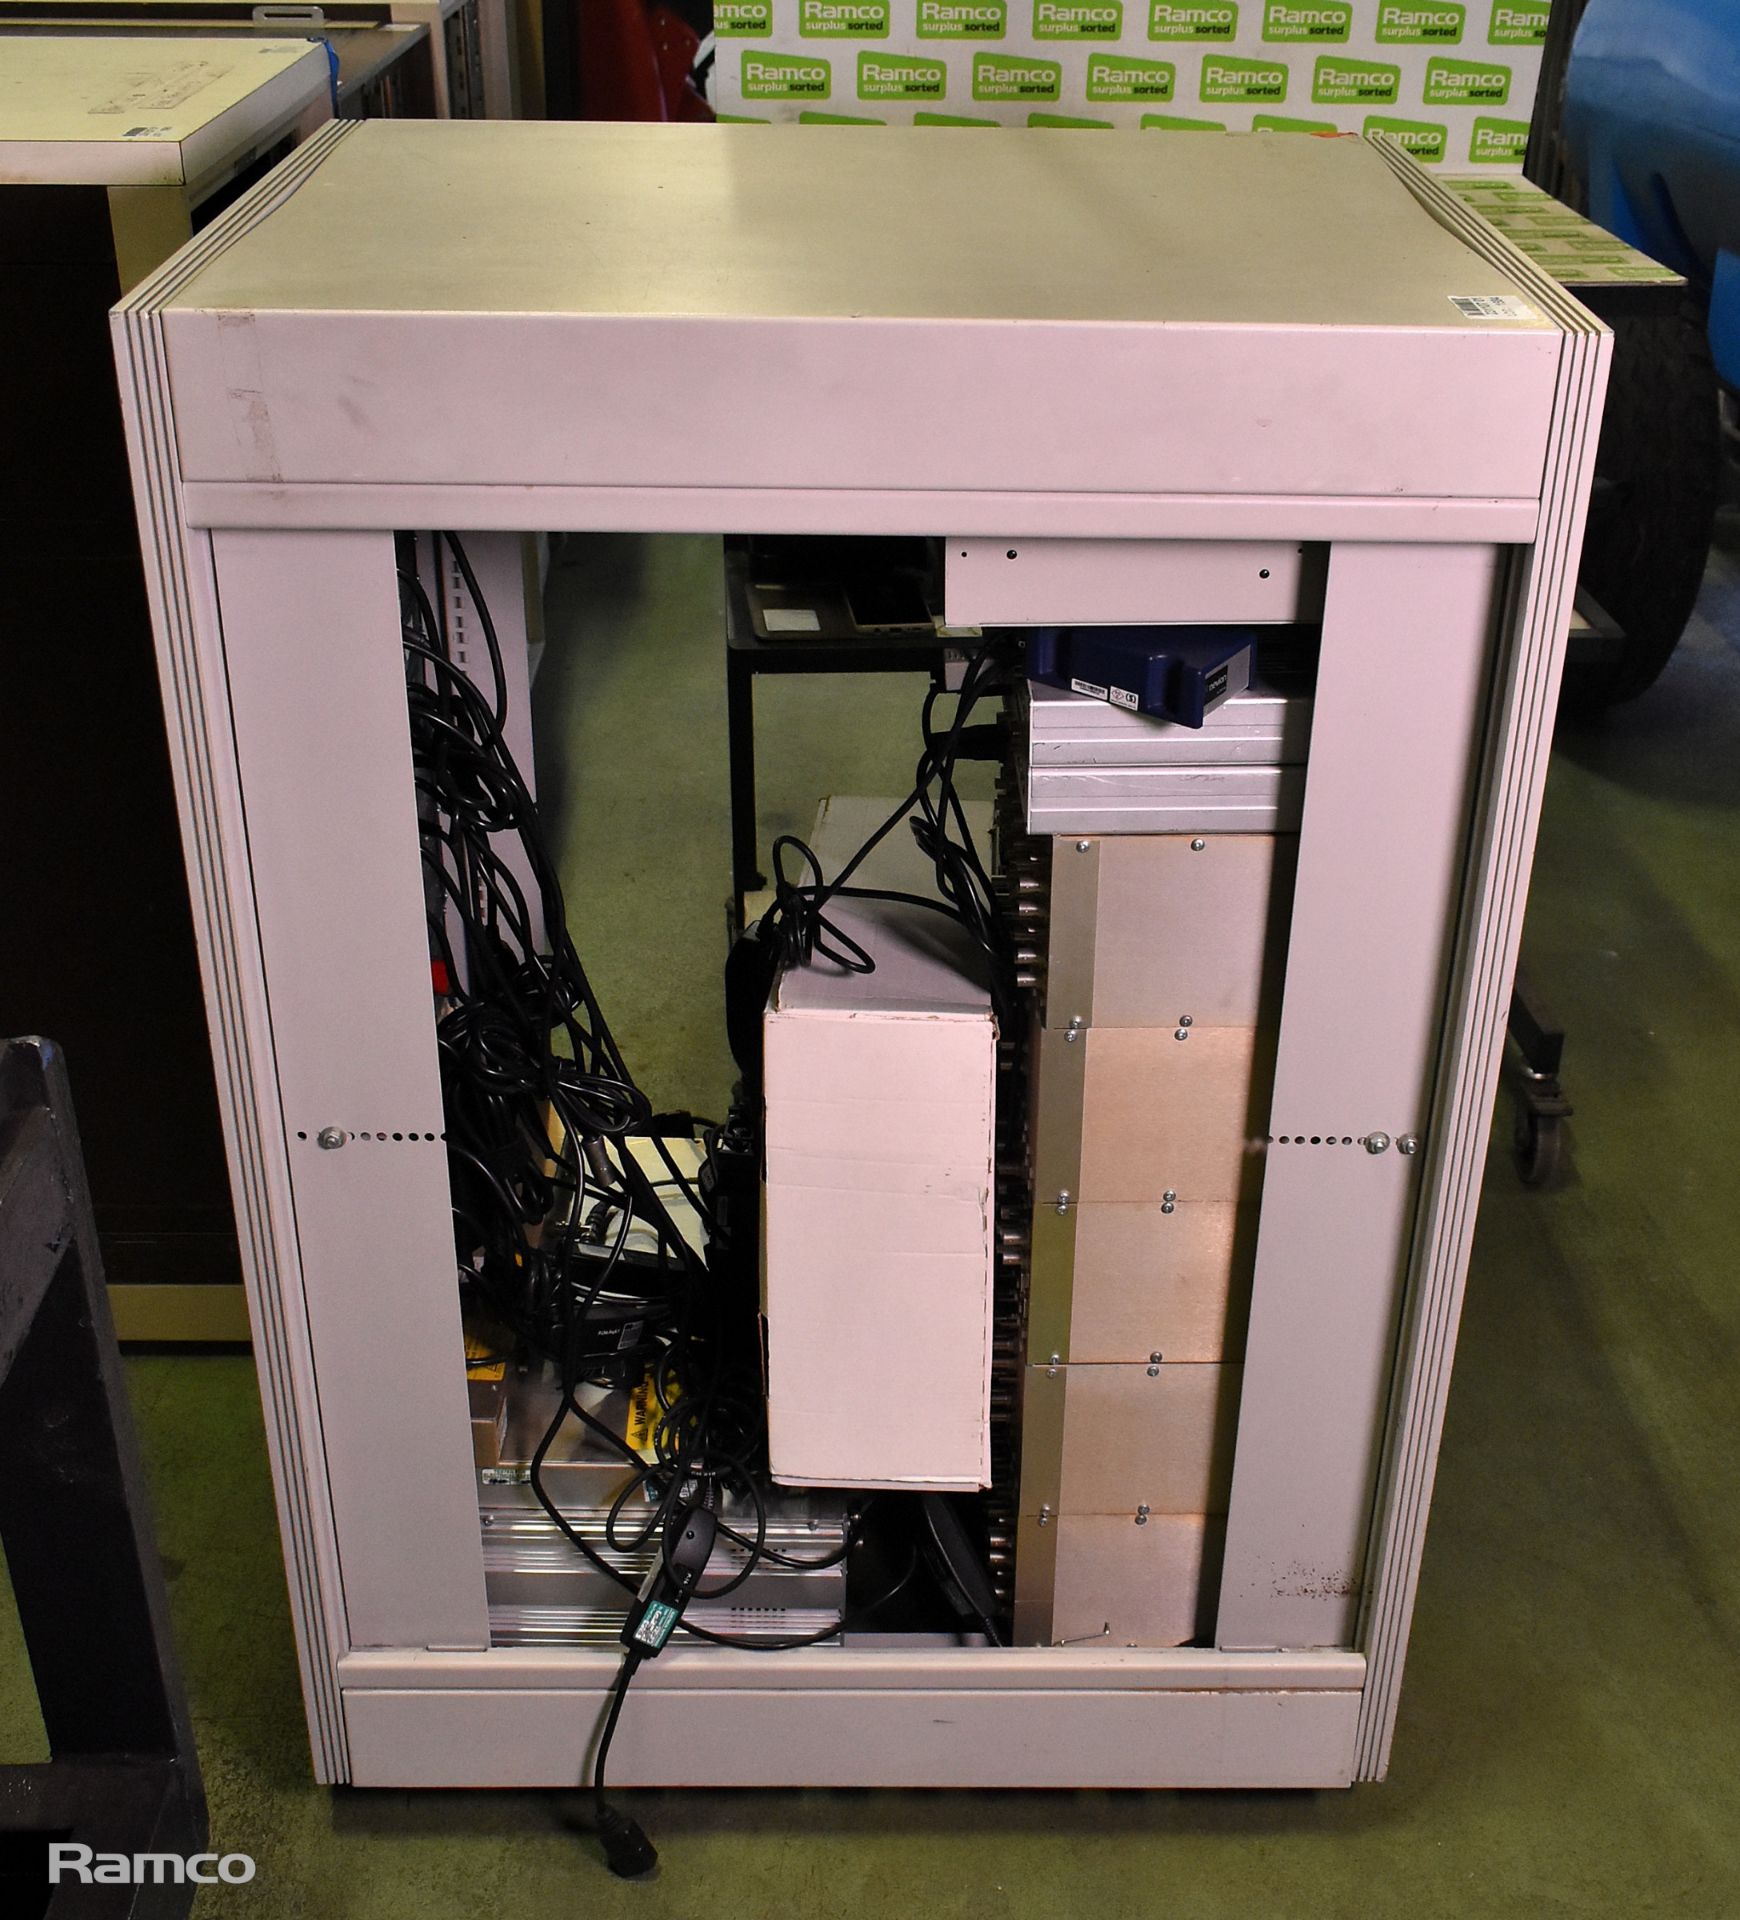 21U server rack complete with Network VikinX 16-ProXY / 32-ProXY / Universal control panels and more - Image 6 of 6